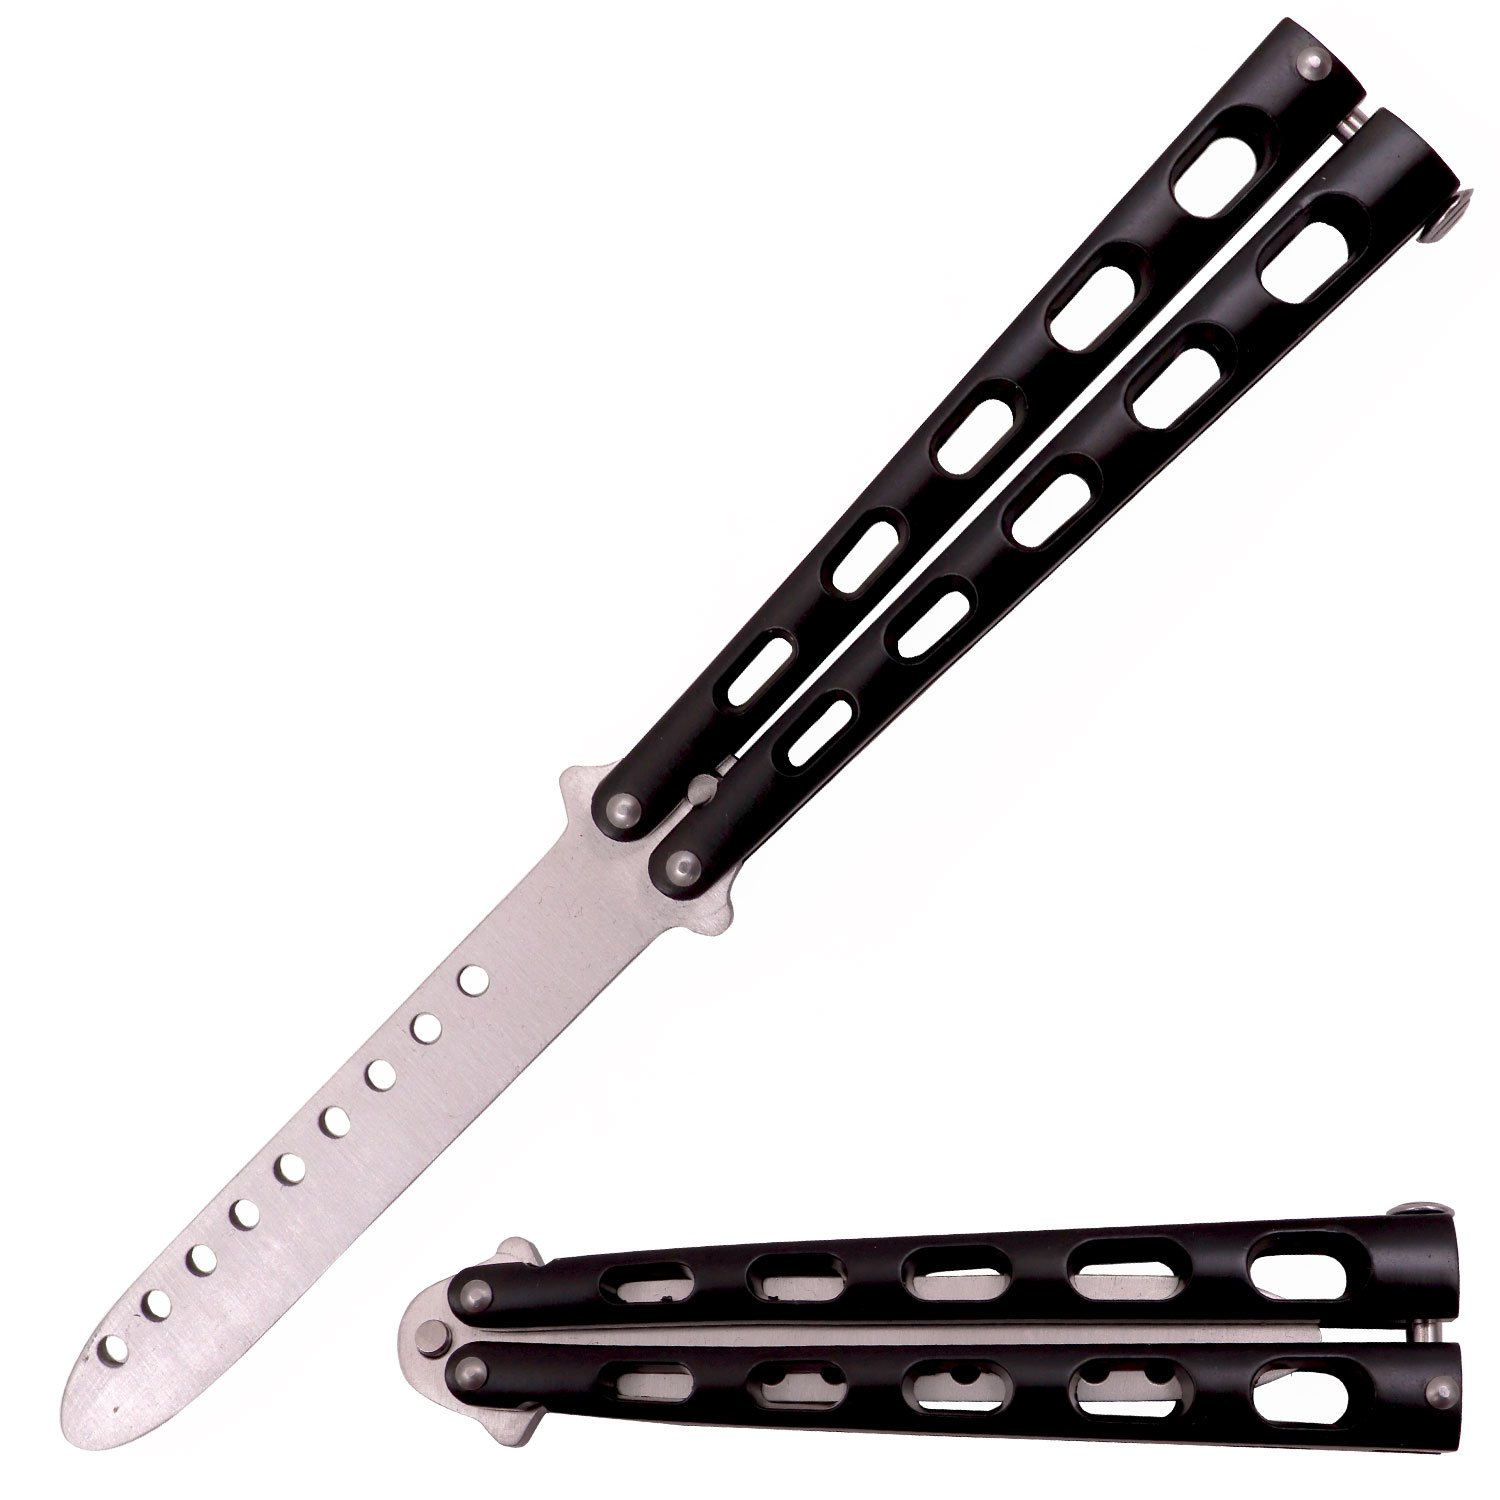 Tiger USA Butterfly Training Knife 440 Stainless 8.85 Inch Black